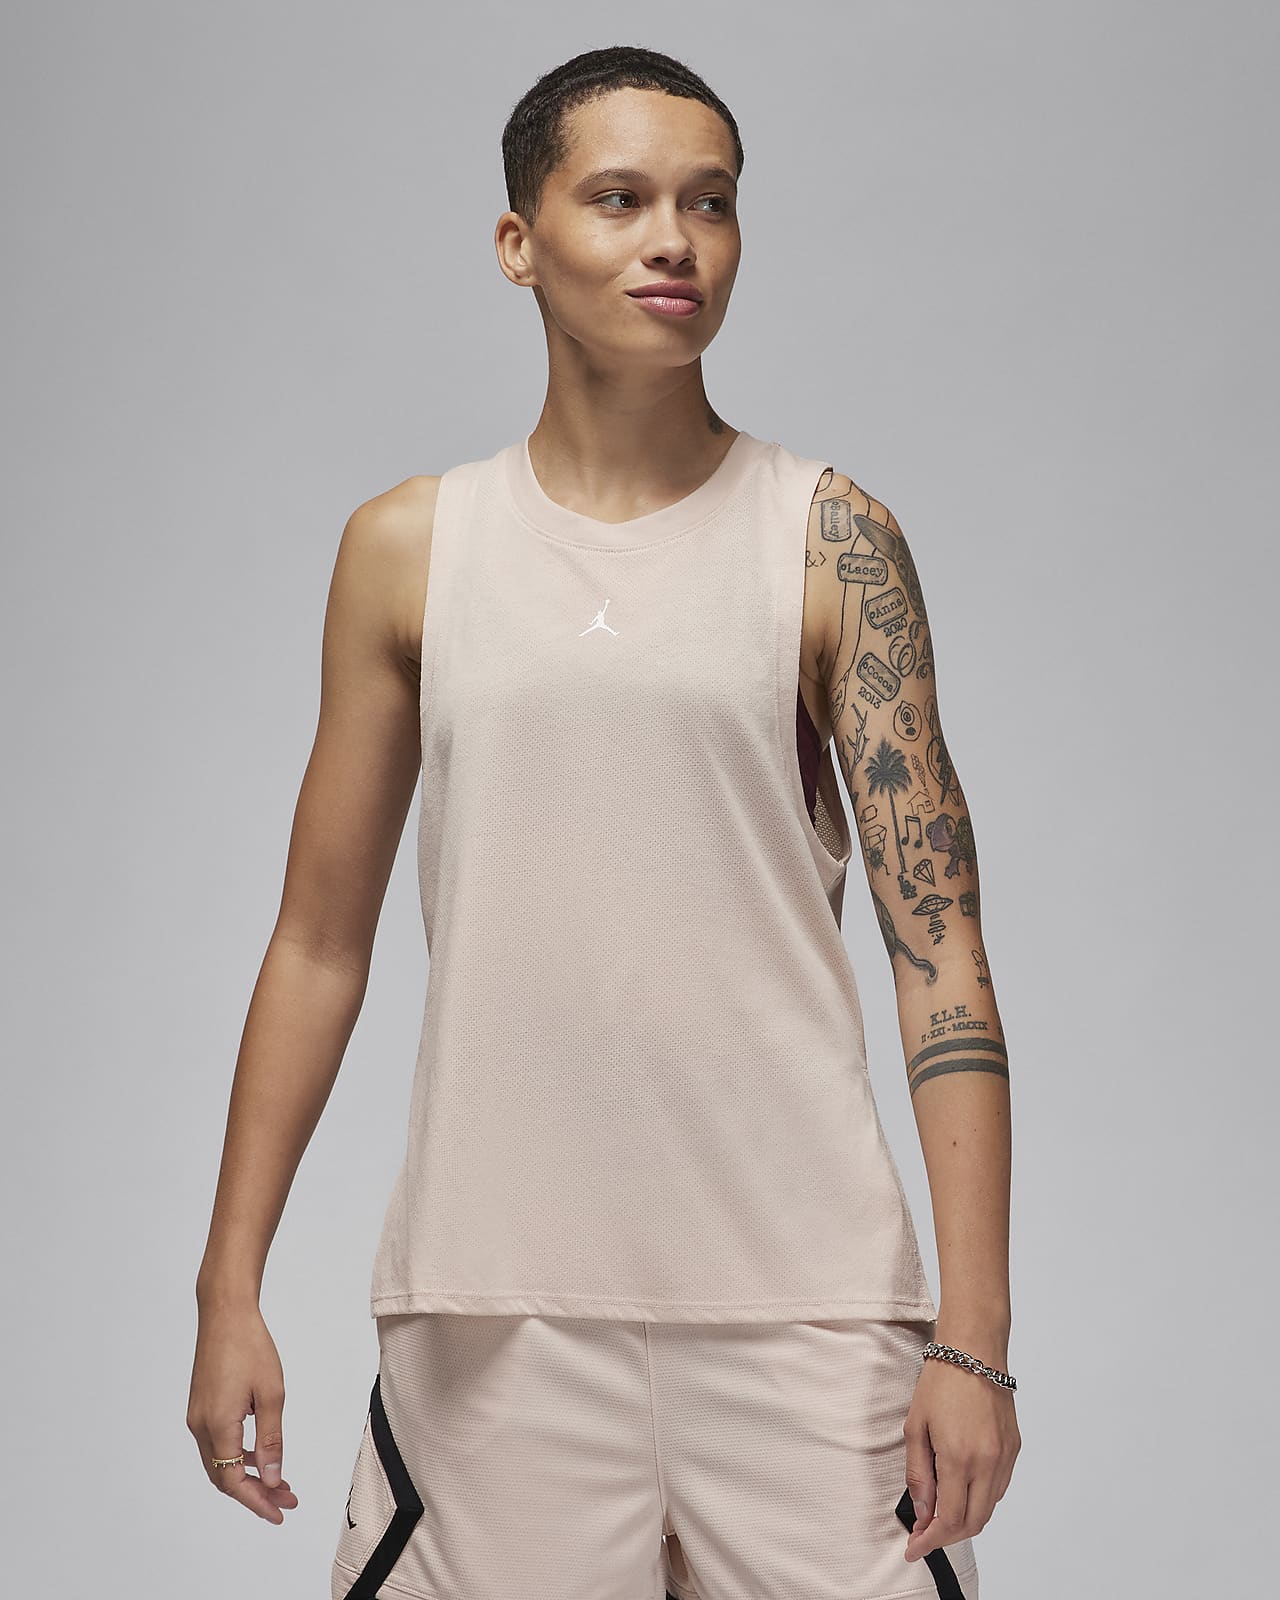 Sports Tank Top with Side Mesh Panels  Sport tank tops, Athletic tank tops,  Sport tank